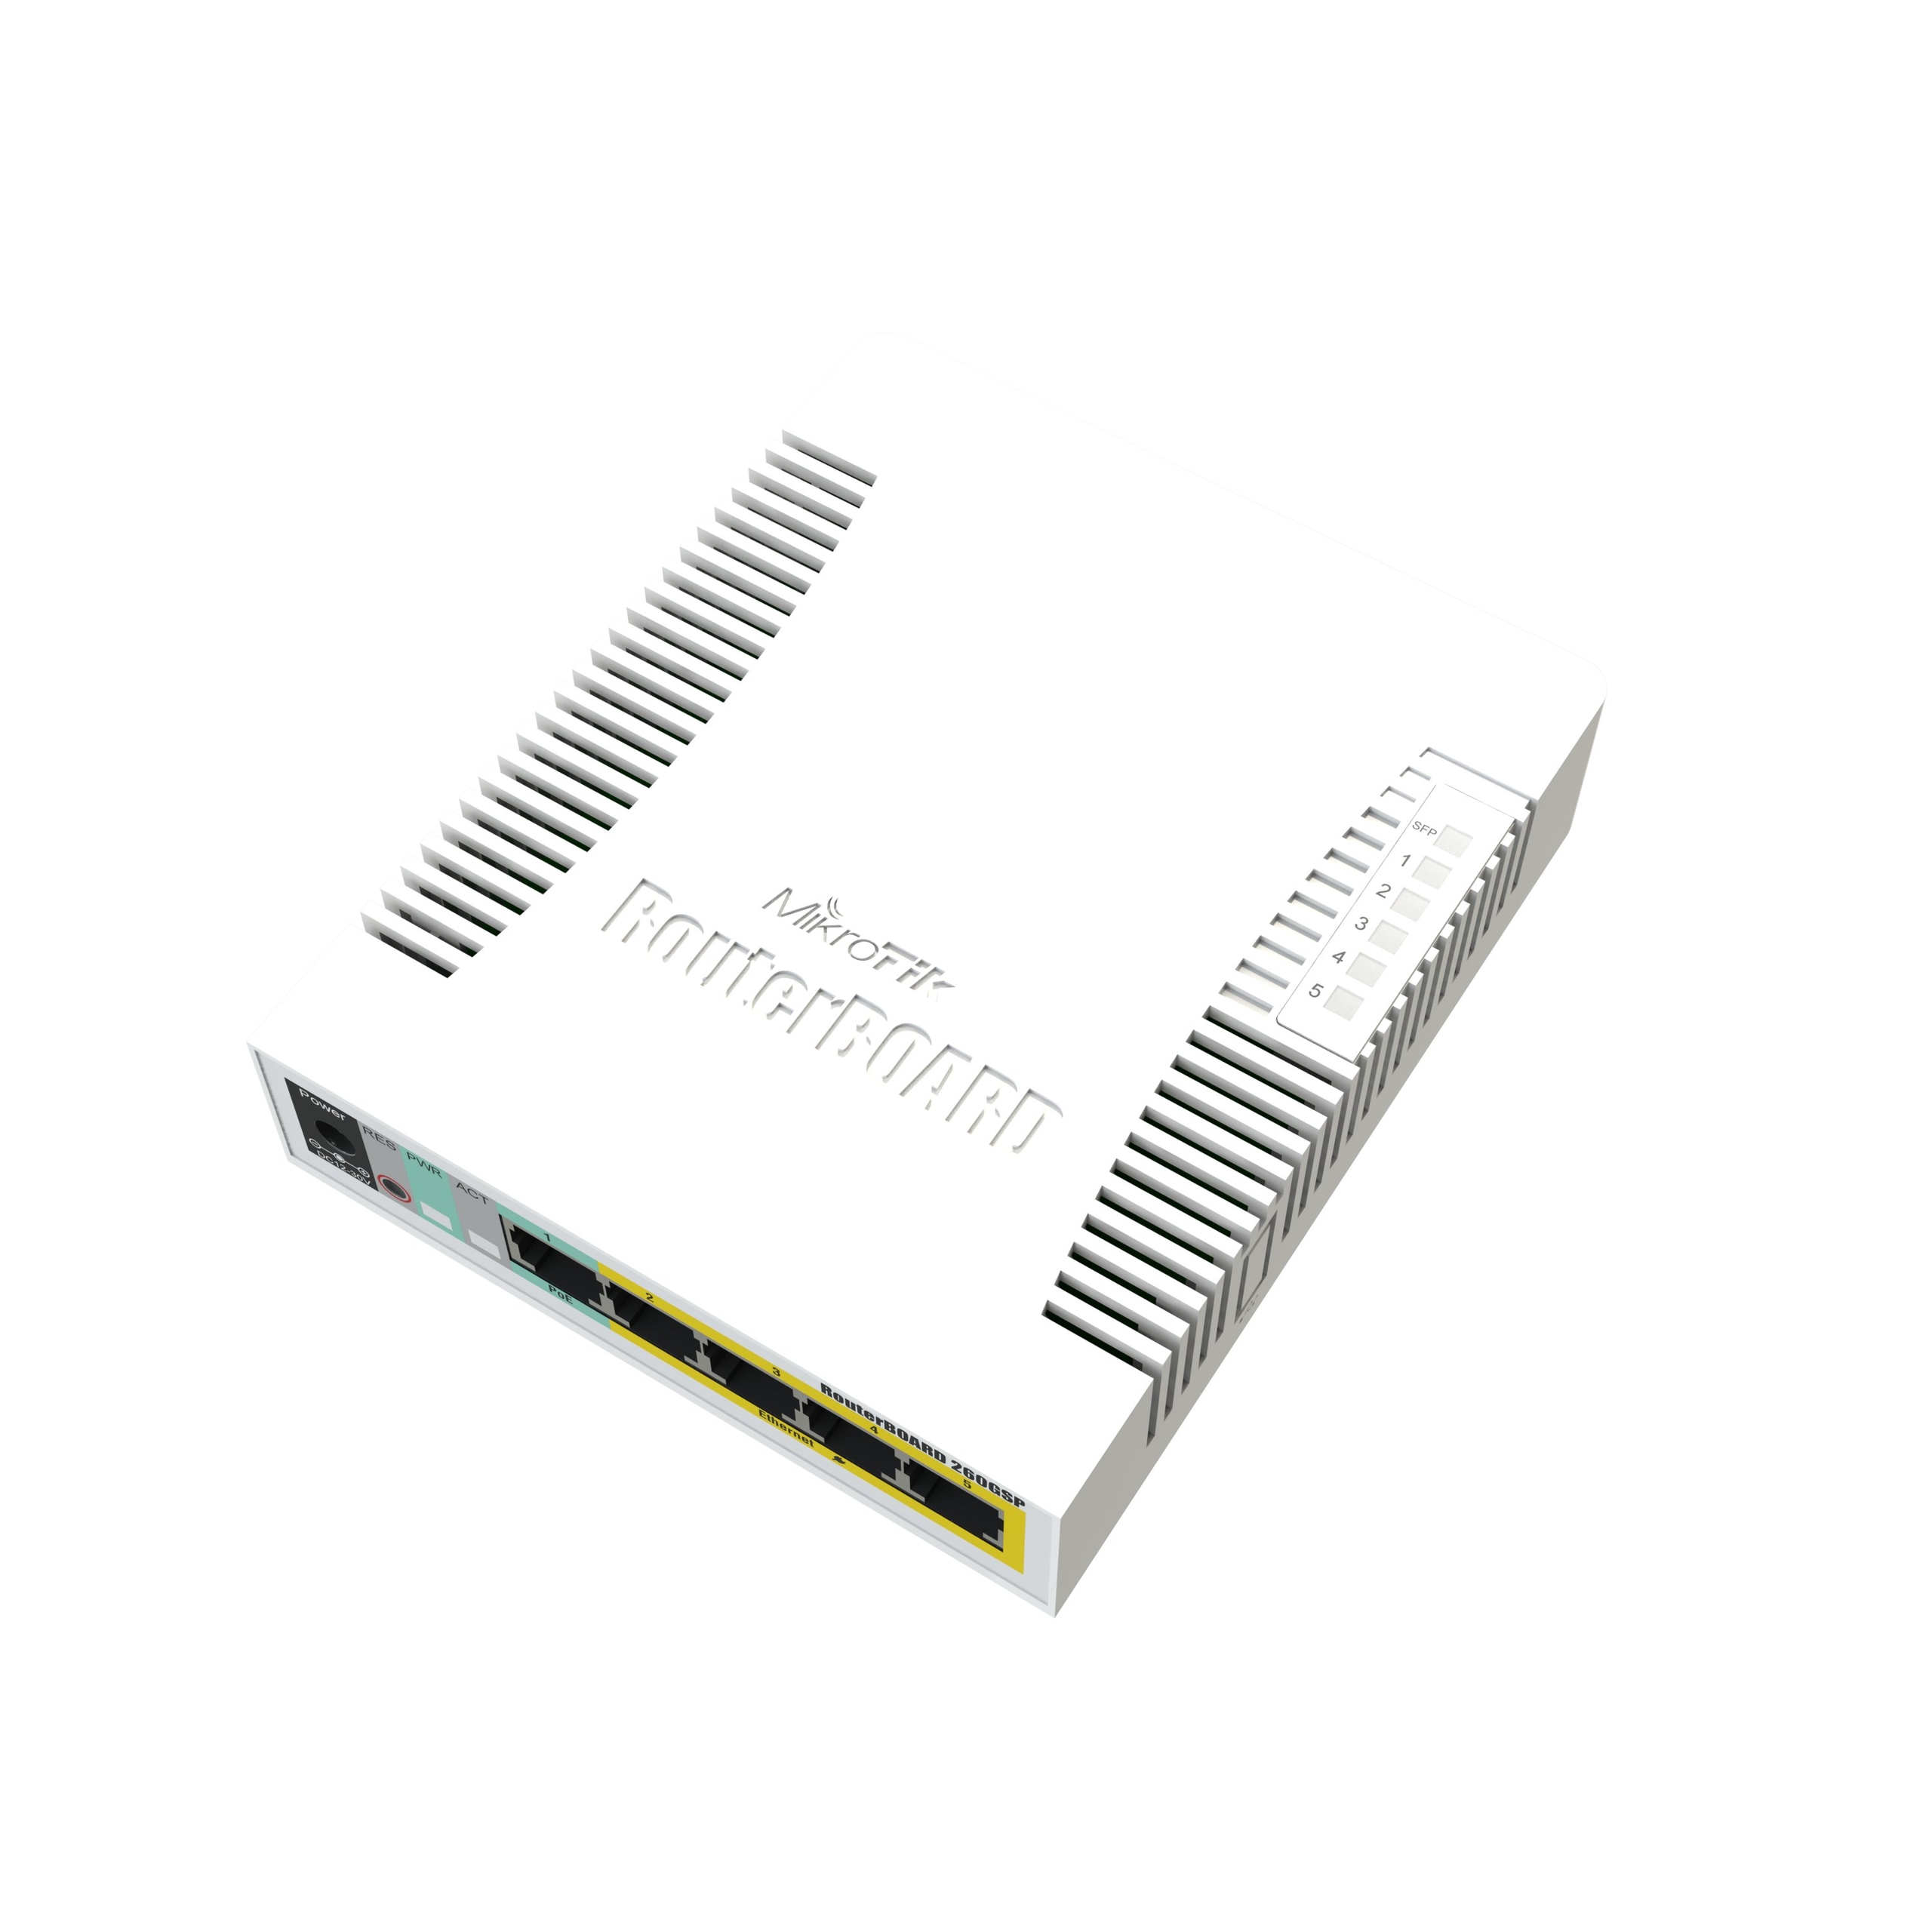 MikroTik RouterBOARD CSS106-1G-4P-1S 5-Port Switch (RB260GSP)